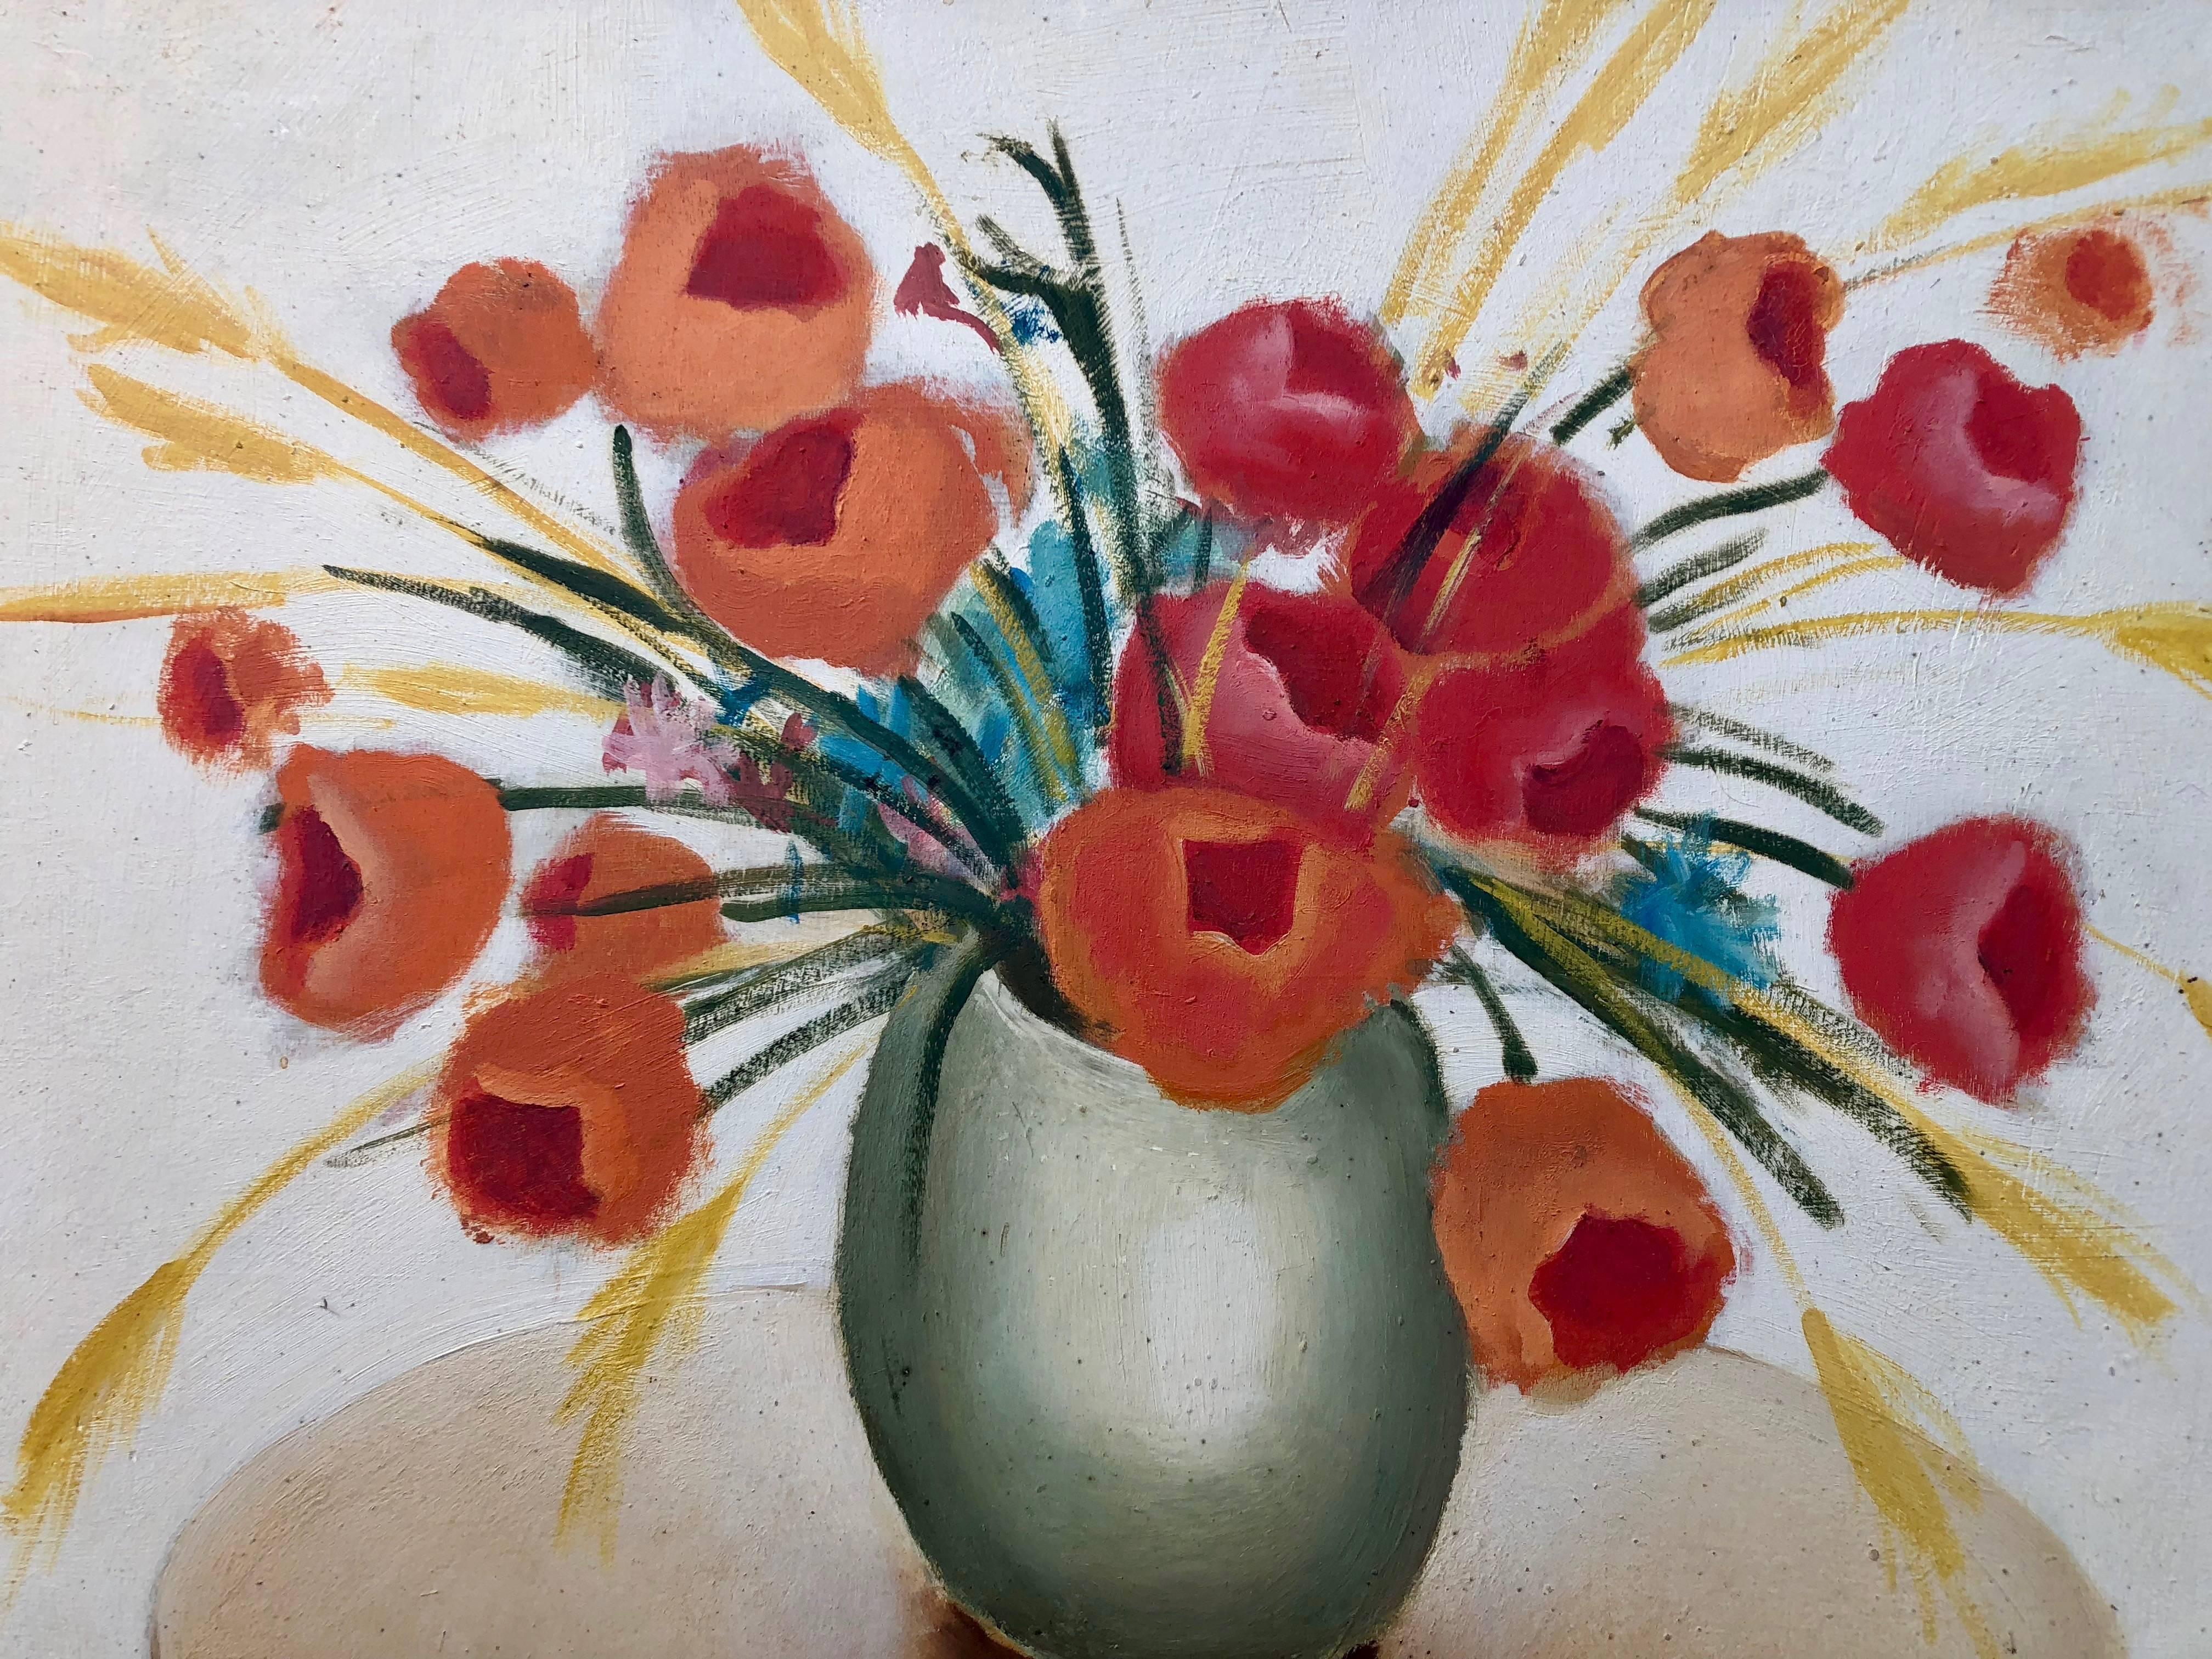 This framed oil painting on wood is by French artist Maurice Esnault (1854-1940) who is known for such still life pieces. This painting is of a vase filled with orange/red flowers sitting on a table and has a cream color background. It is a lovely